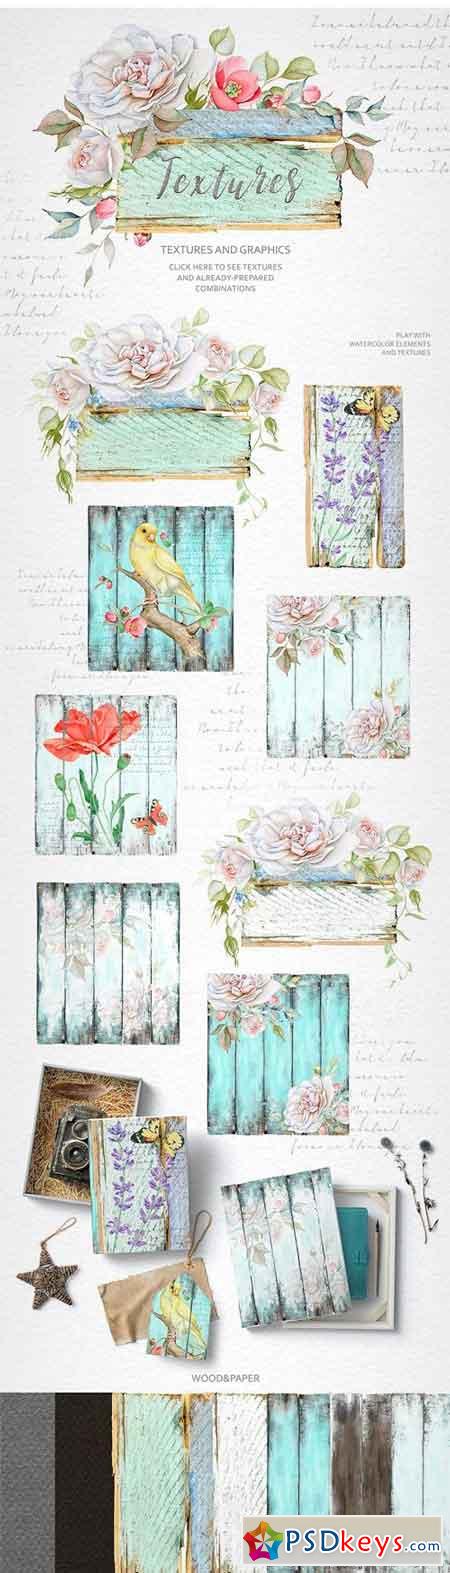 Watercolor Floral Collection 1851675